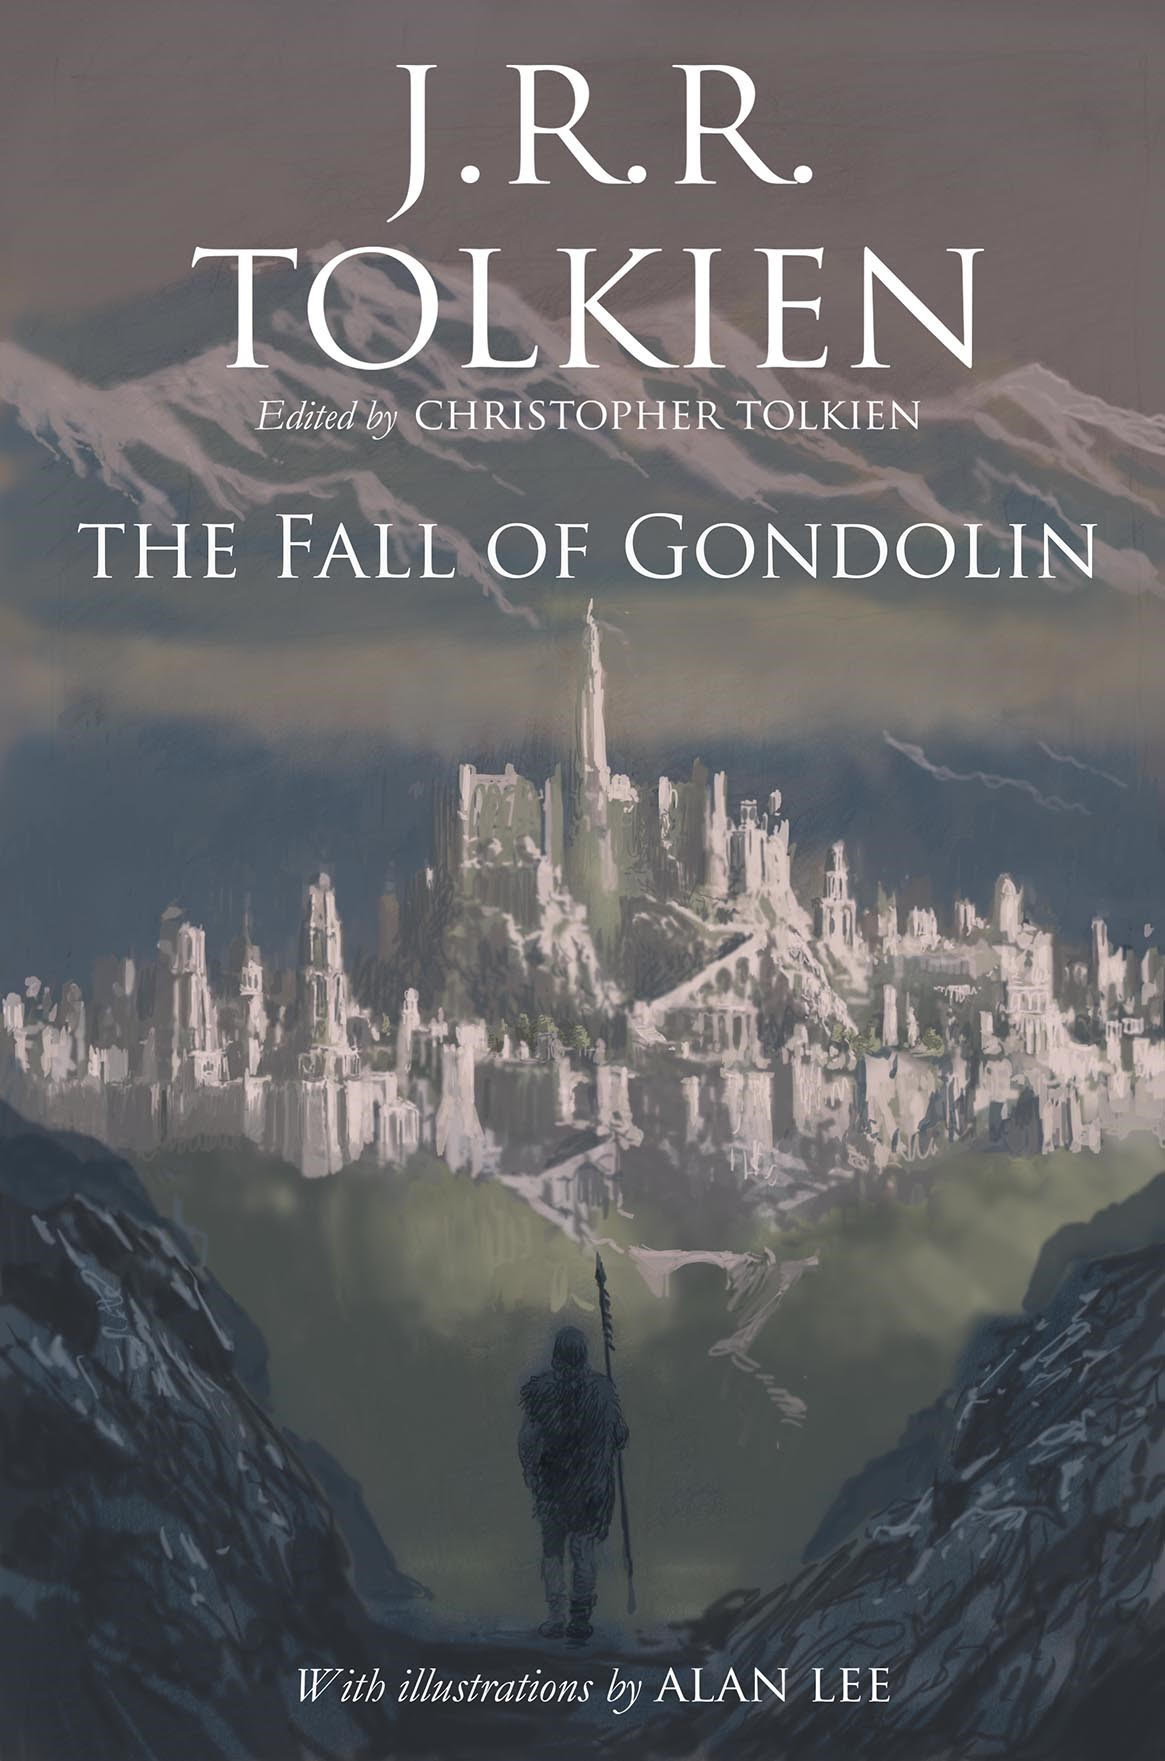 HMH to Release New Tolkien